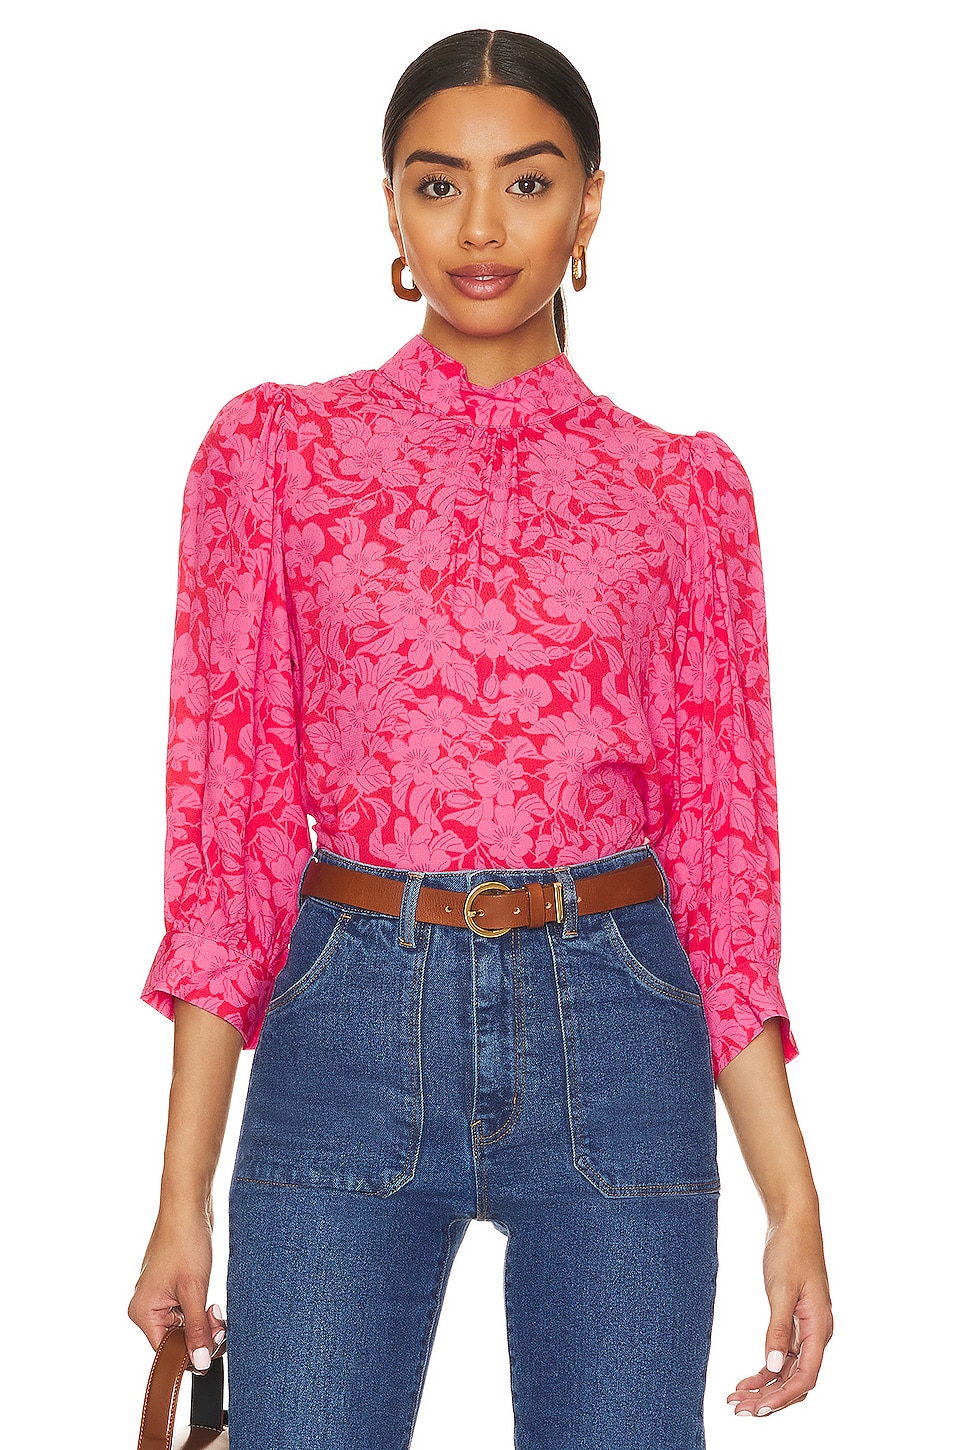 ROLLA'S Ivy Floral Stephanie Top in SCARLET